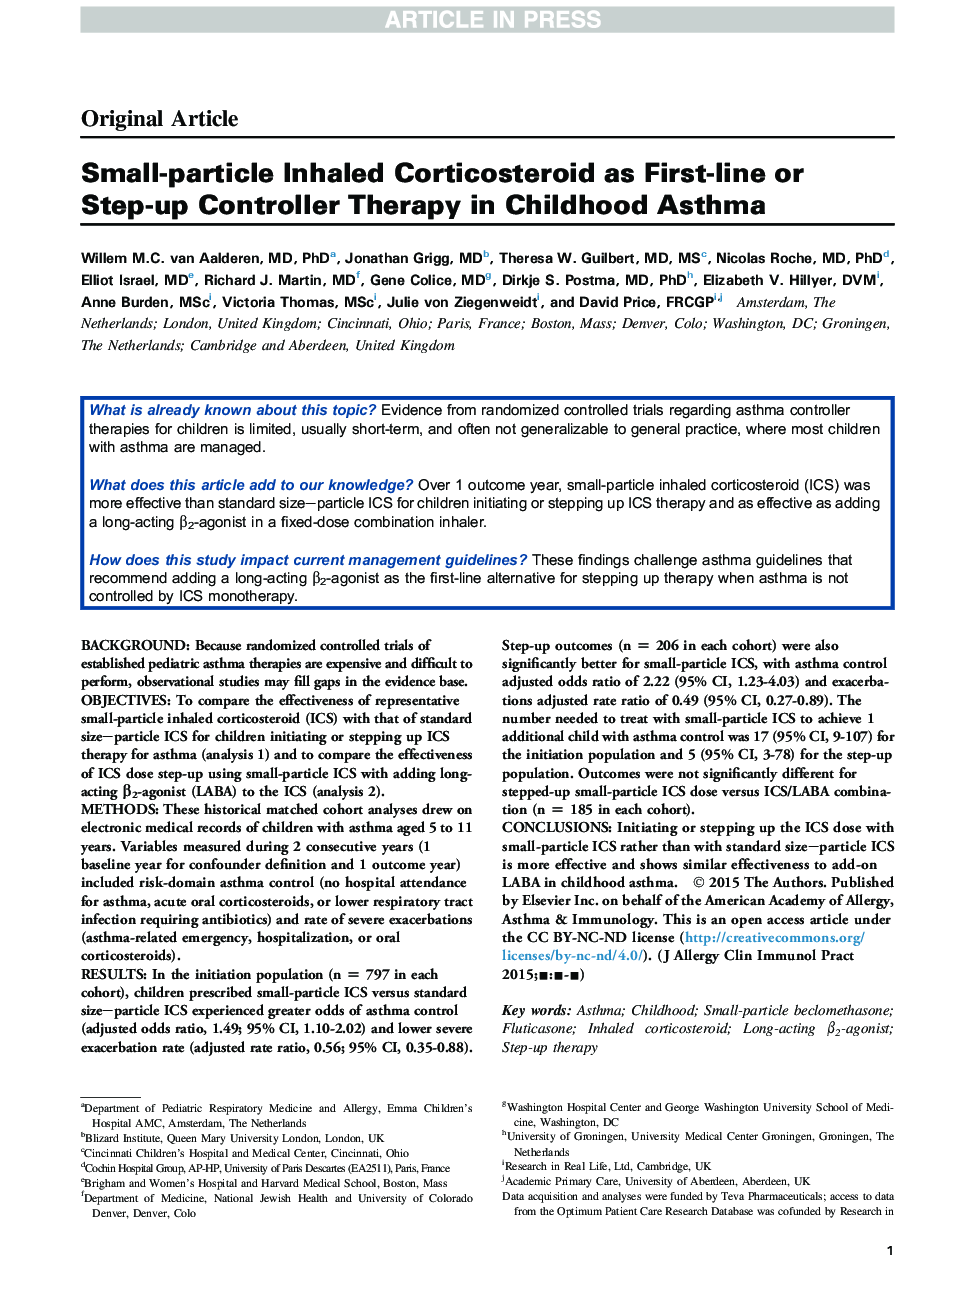 Small-particle Inhaled Corticosteroid as First-line or Step-up Controller Therapy in Childhood Asthma